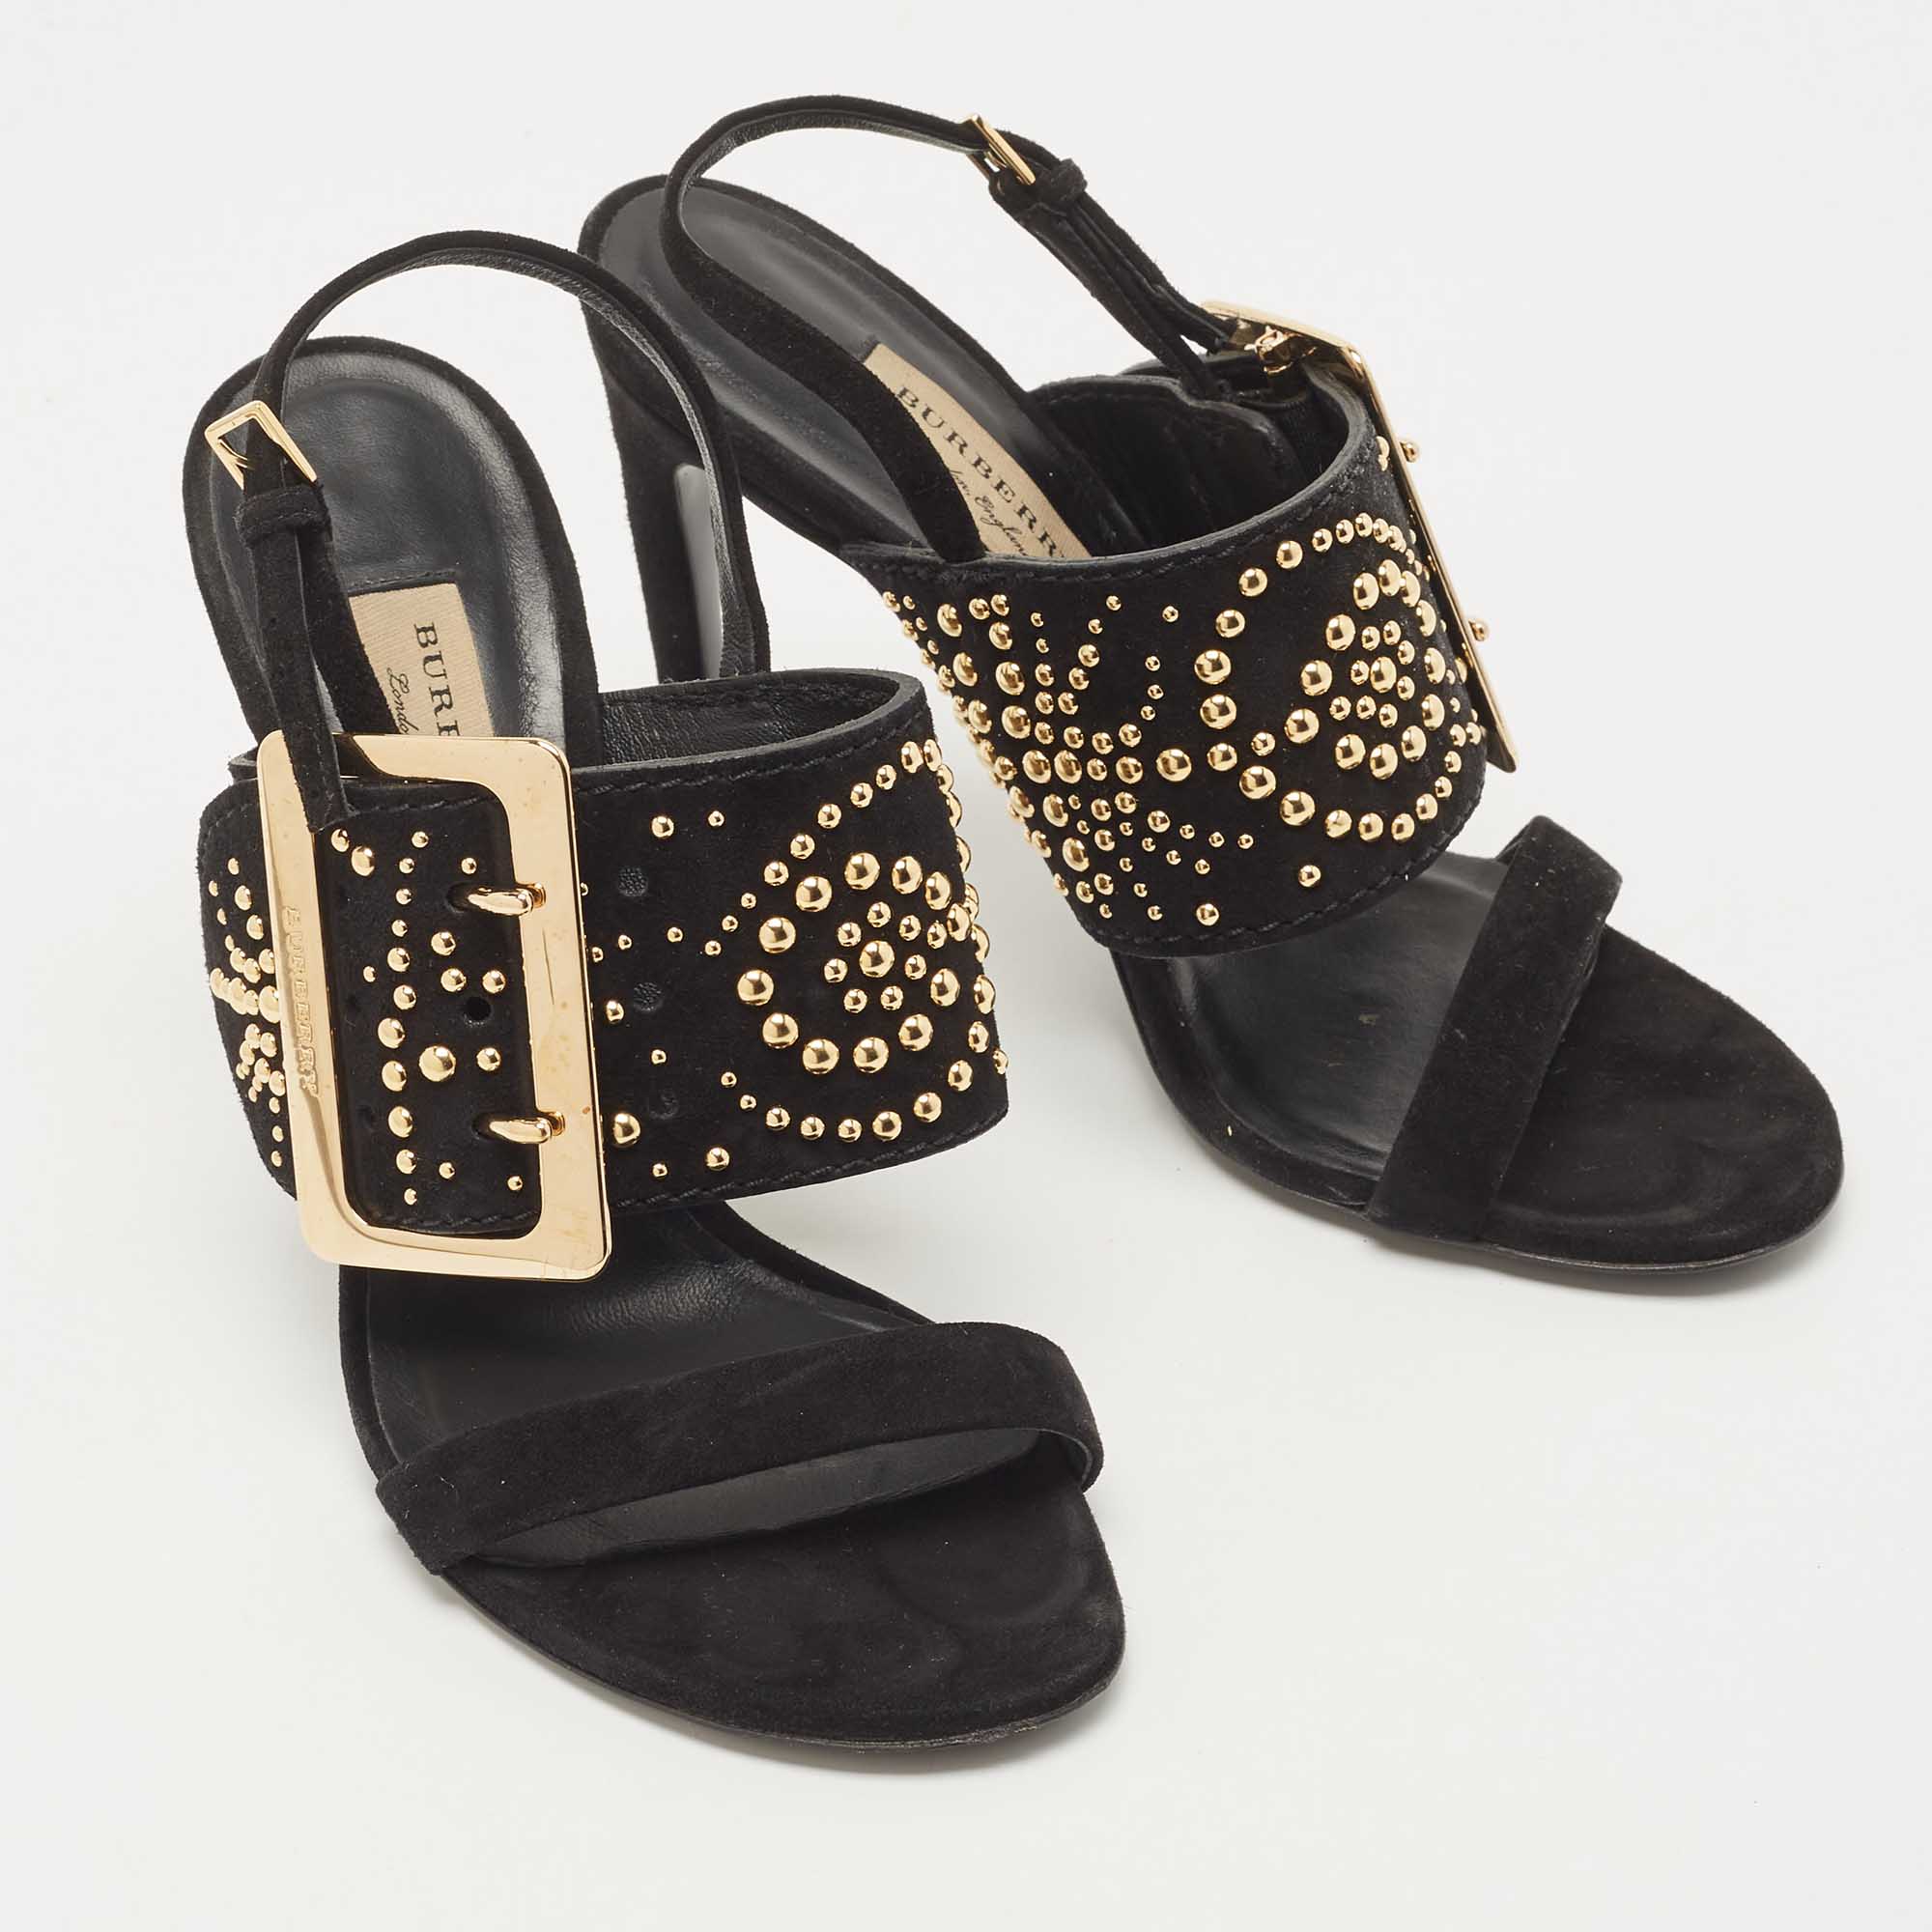 Burberry Black Suede Stud Embellished Padstow Sandals Size 37